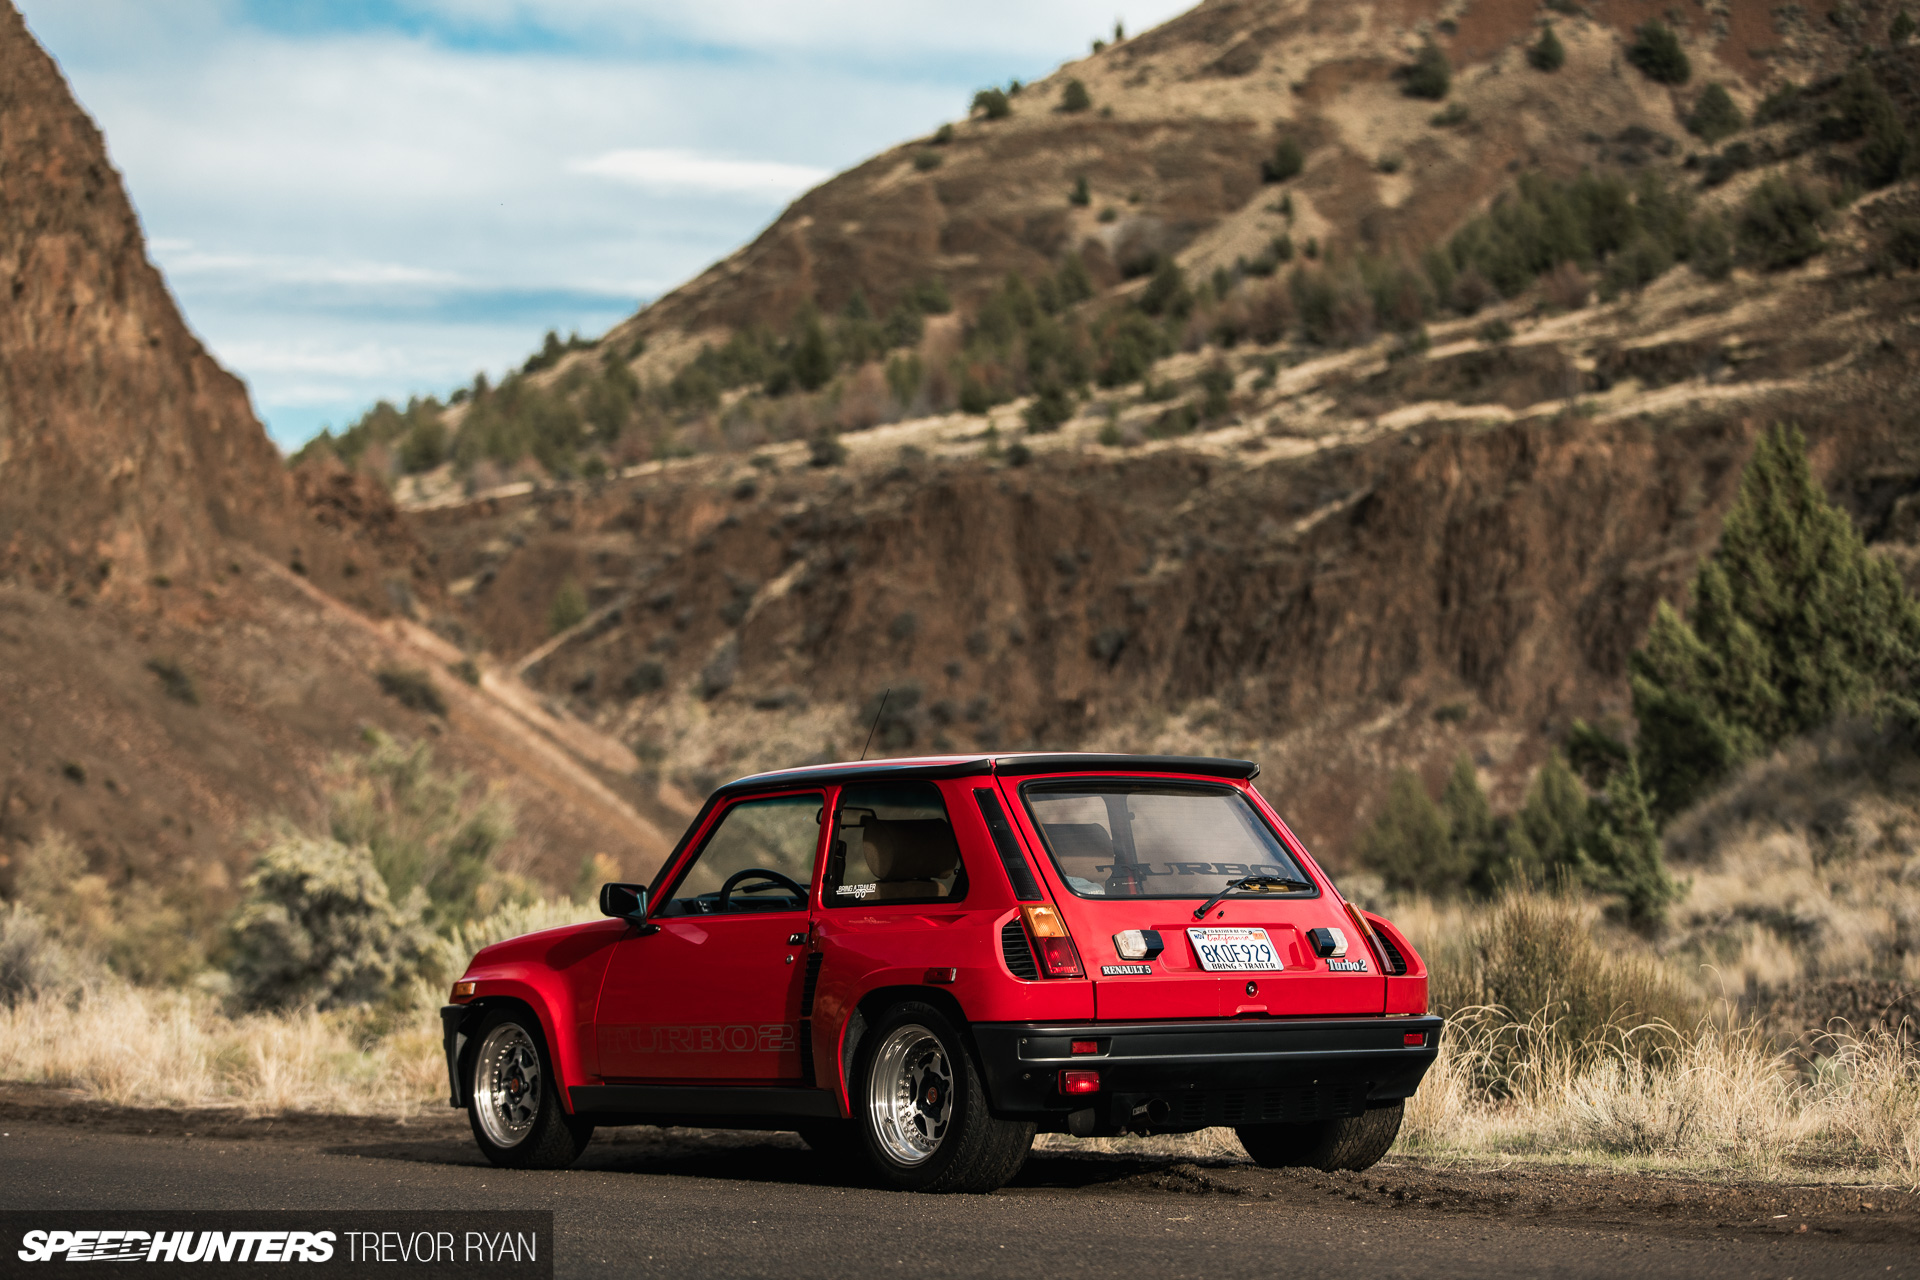 usa, speedhunting, road rally, renault, rally, r5 turbo 2, project 345, overcrest rally 2023, overcrest rally, oregon, m3, e36, car culture, bmw, 5 turbo 2, what is the overcrest rally?